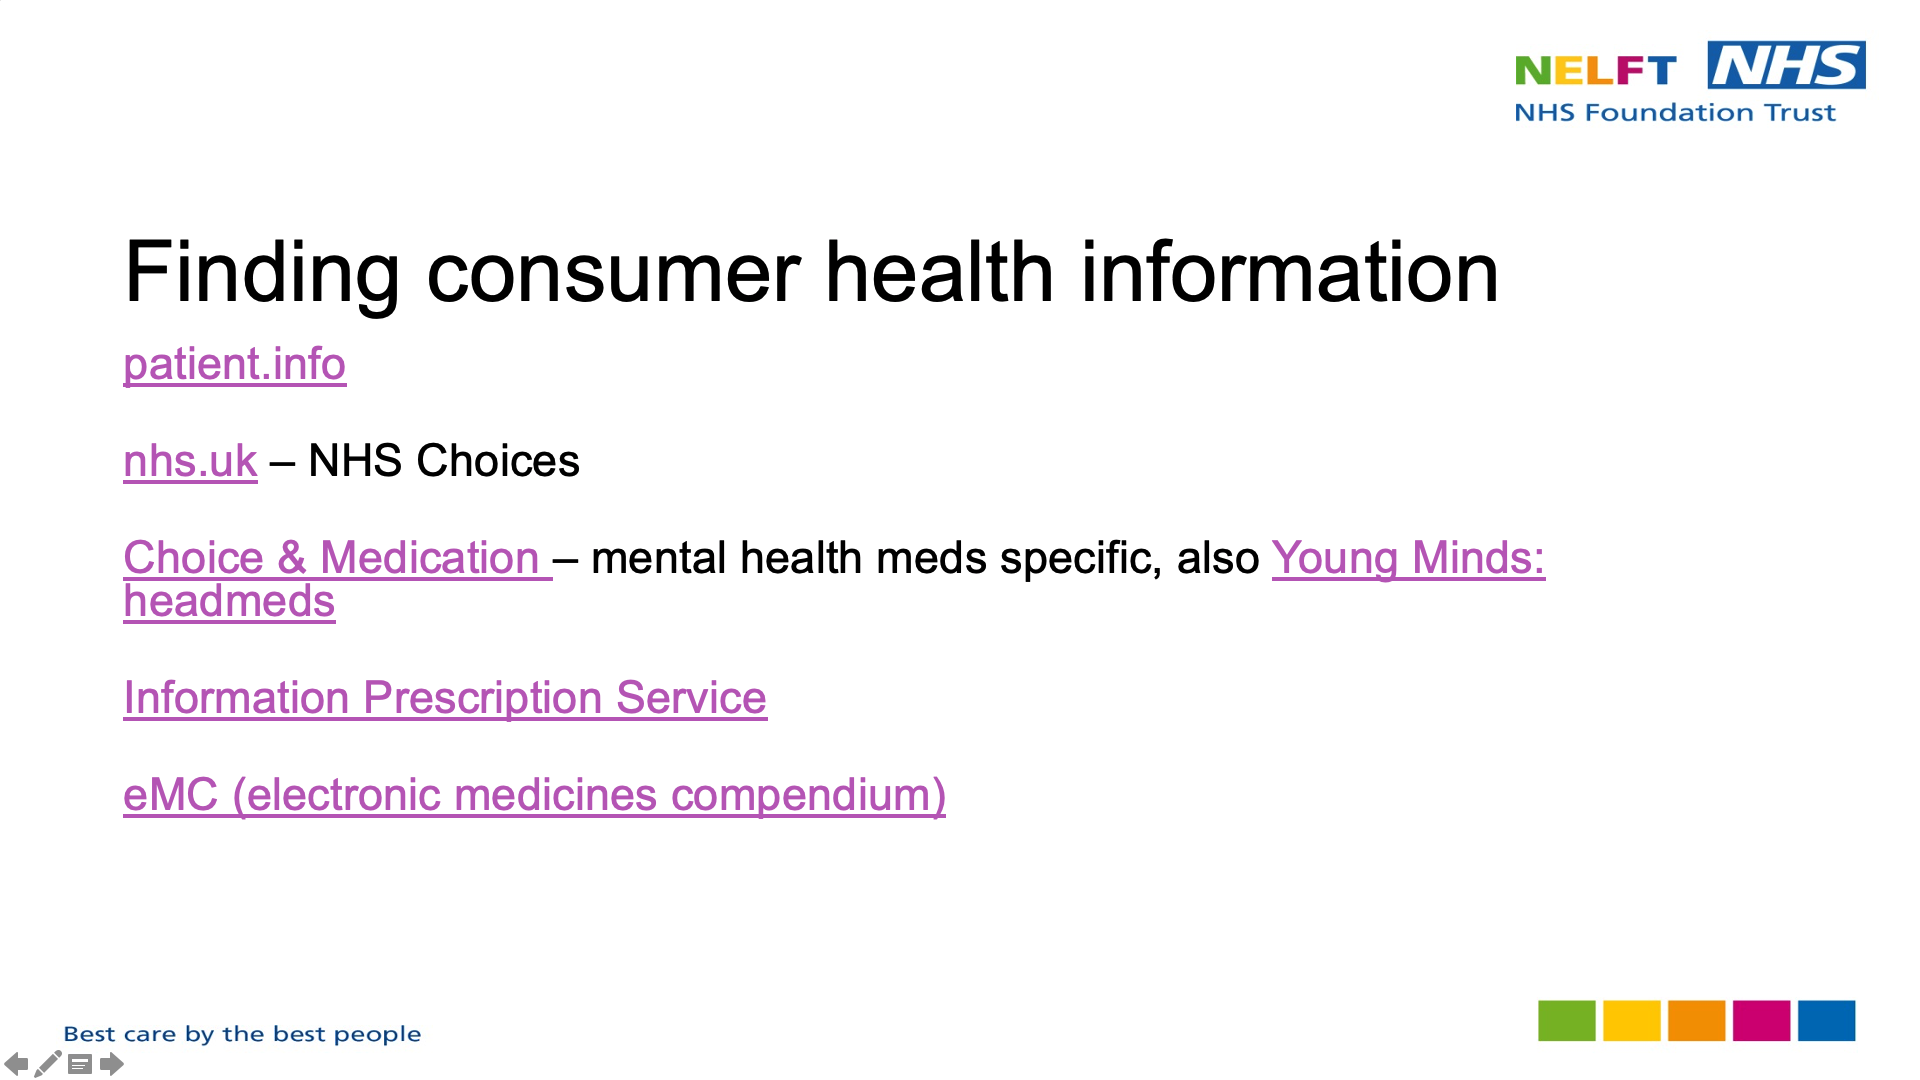 Title: Finding consumer health information. Text on page: patient.info, nhs.uk – NHS Choices, Choice & Medication – mental health meds specific, also Young Minds: headmeds, Information Prescription Service, eMC (electronic medicines compendium)